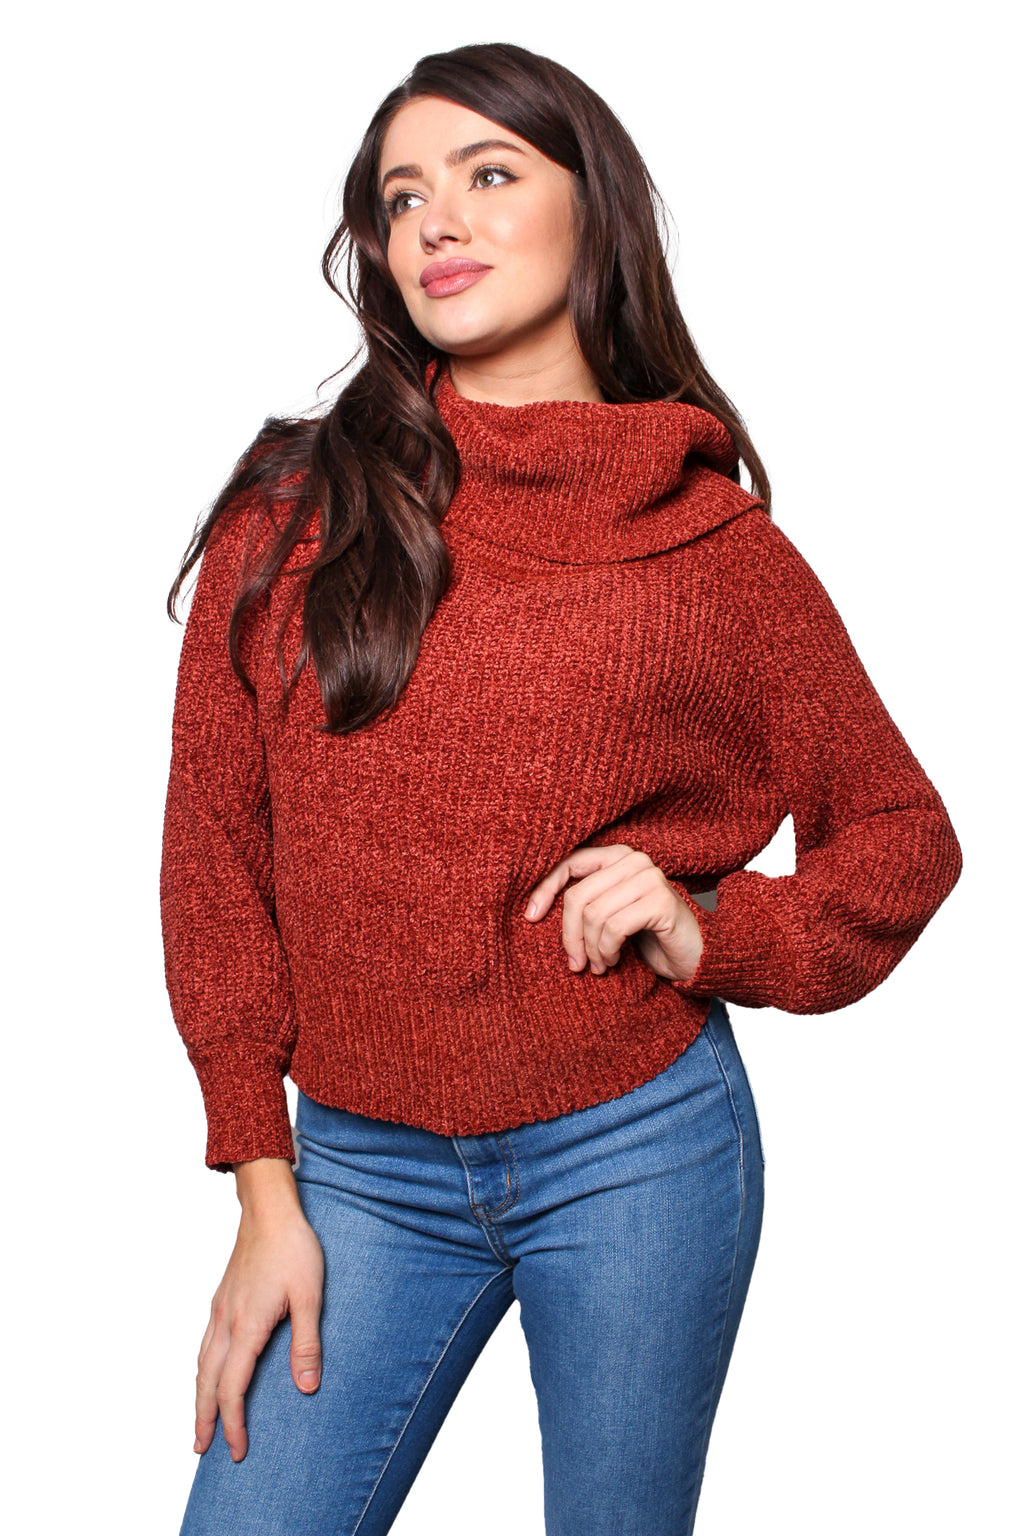 Women's Long Sleeves High Neck Knitted Sweater